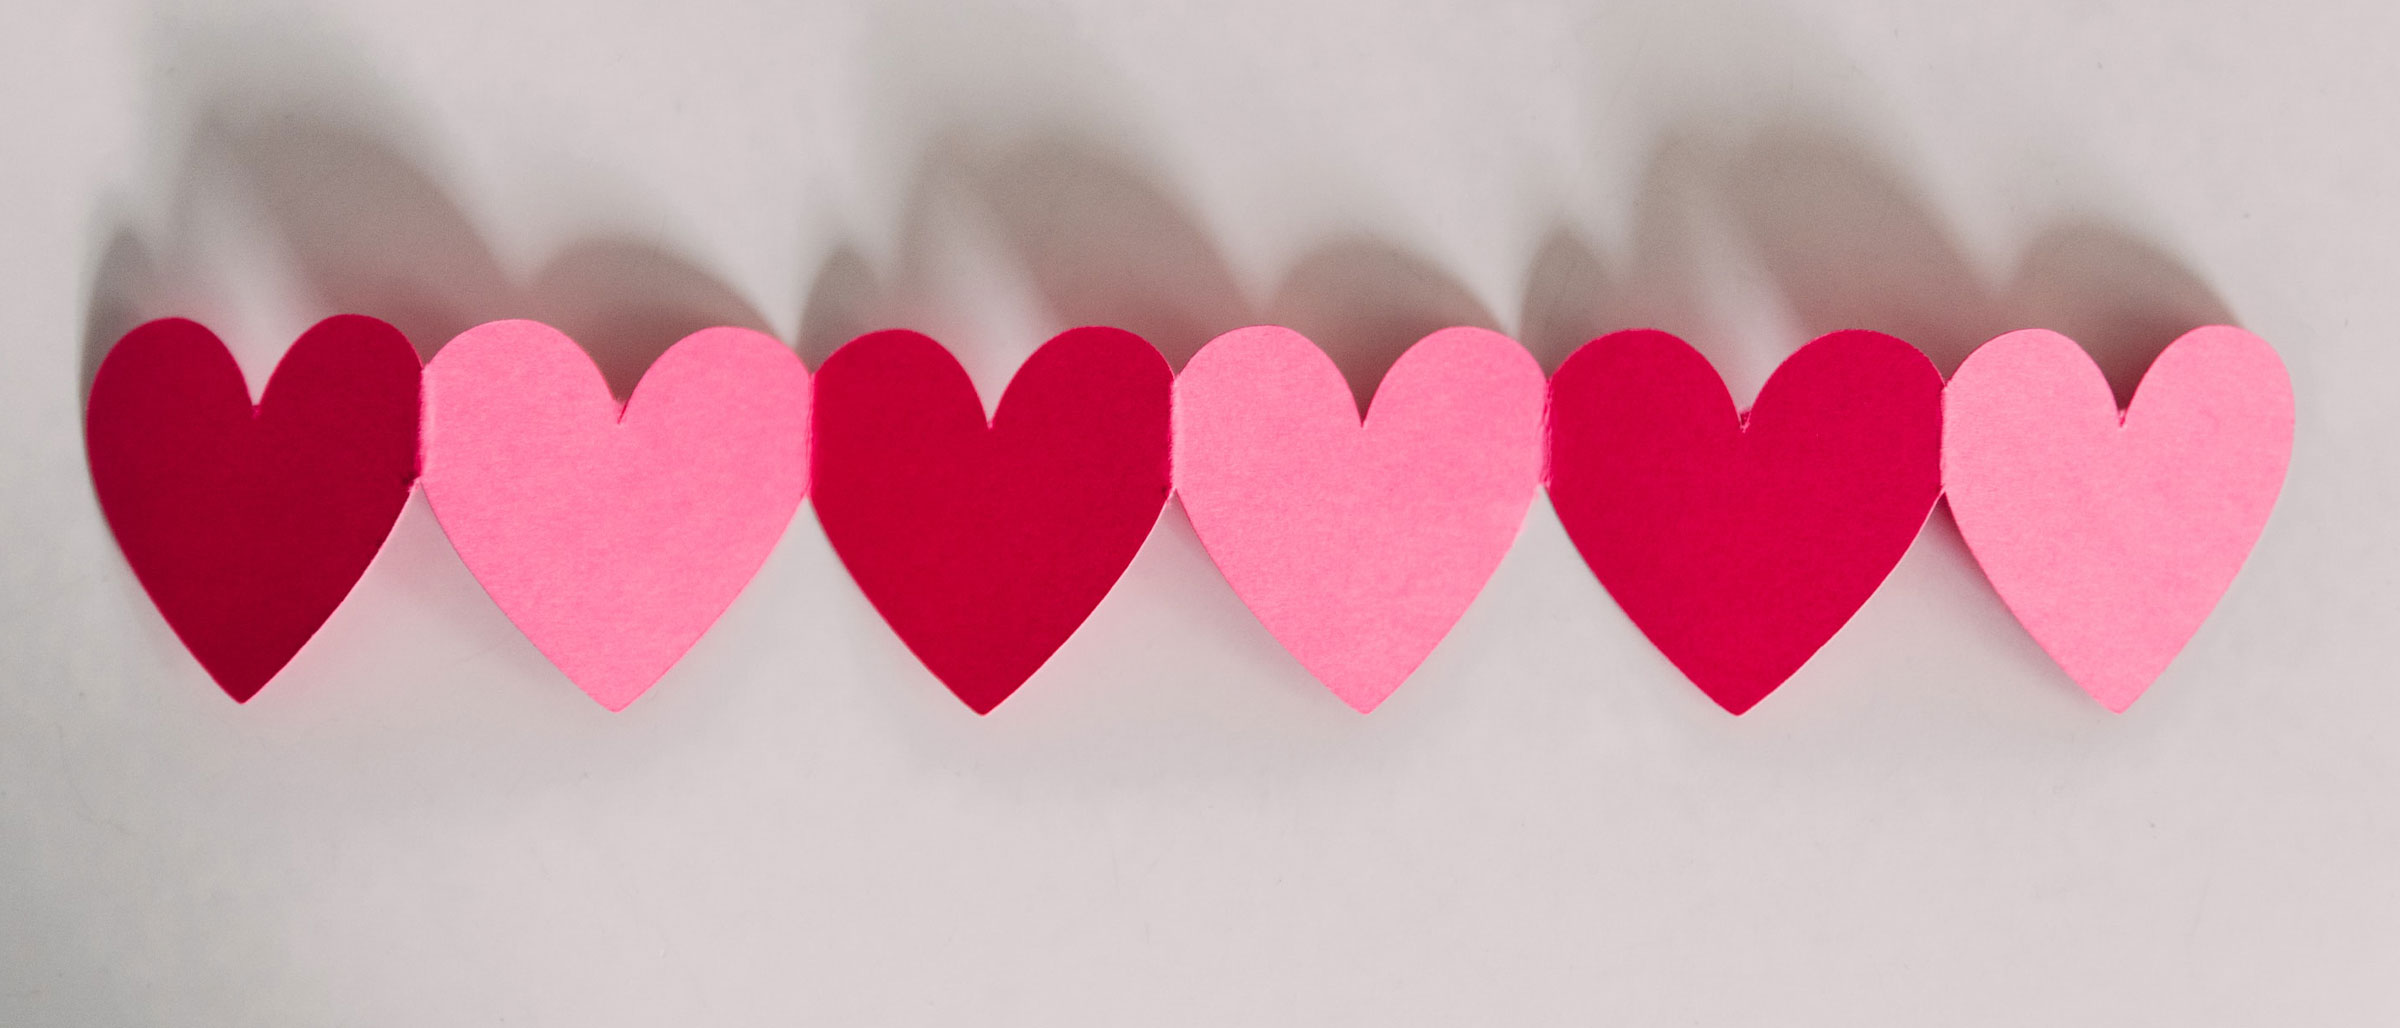 Paper chain of red and pink hearts